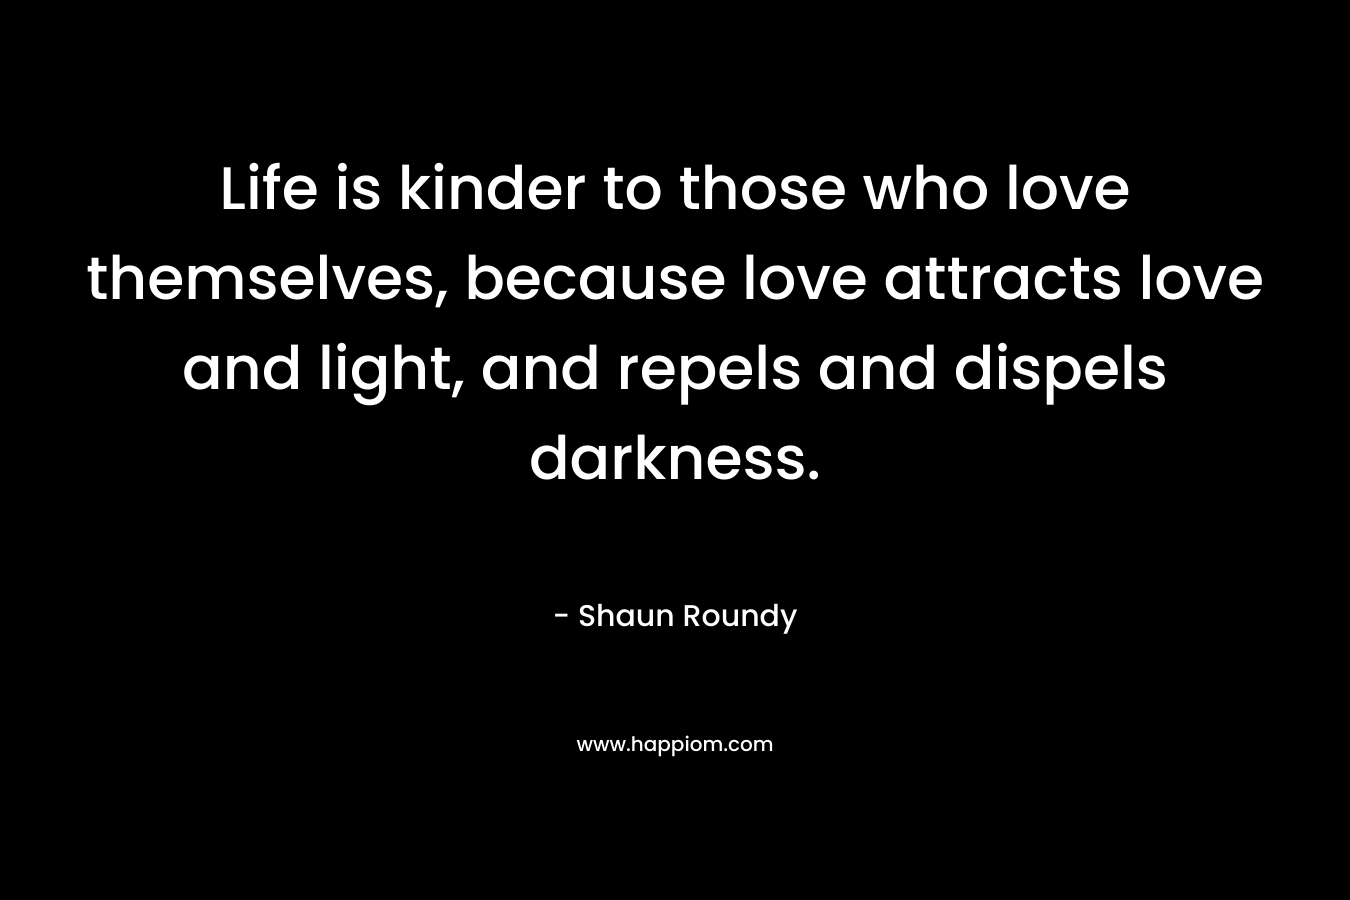 Life is kinder to those who love themselves, because love attracts love and light, and repels and dispels darkness.